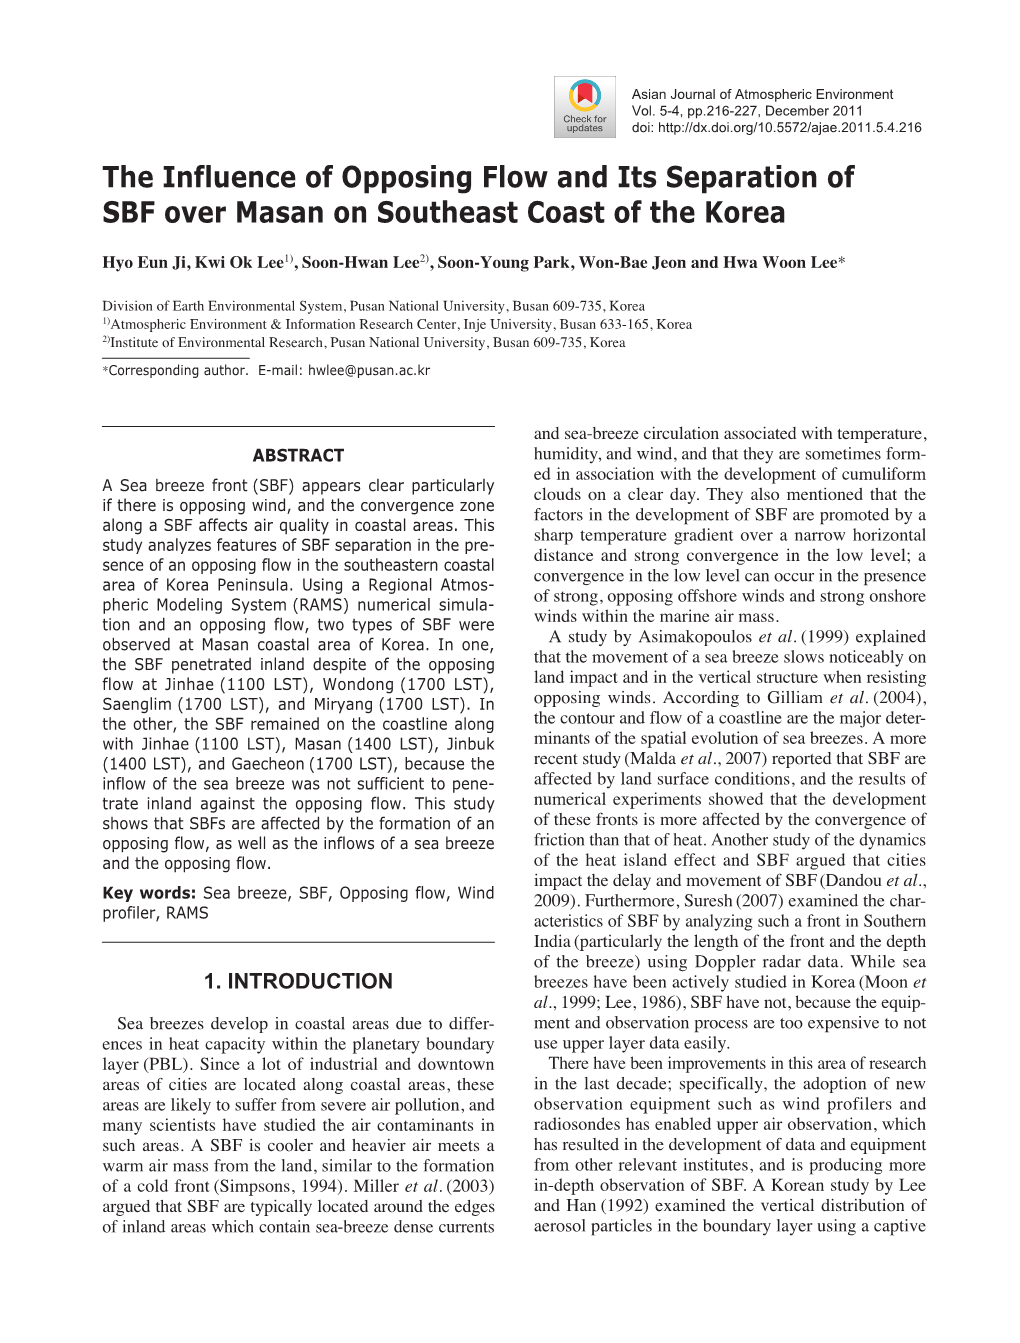 The Influence of Opposing Flow and Its Separation of SBF Over Masan on Southeast Coast of the Korea